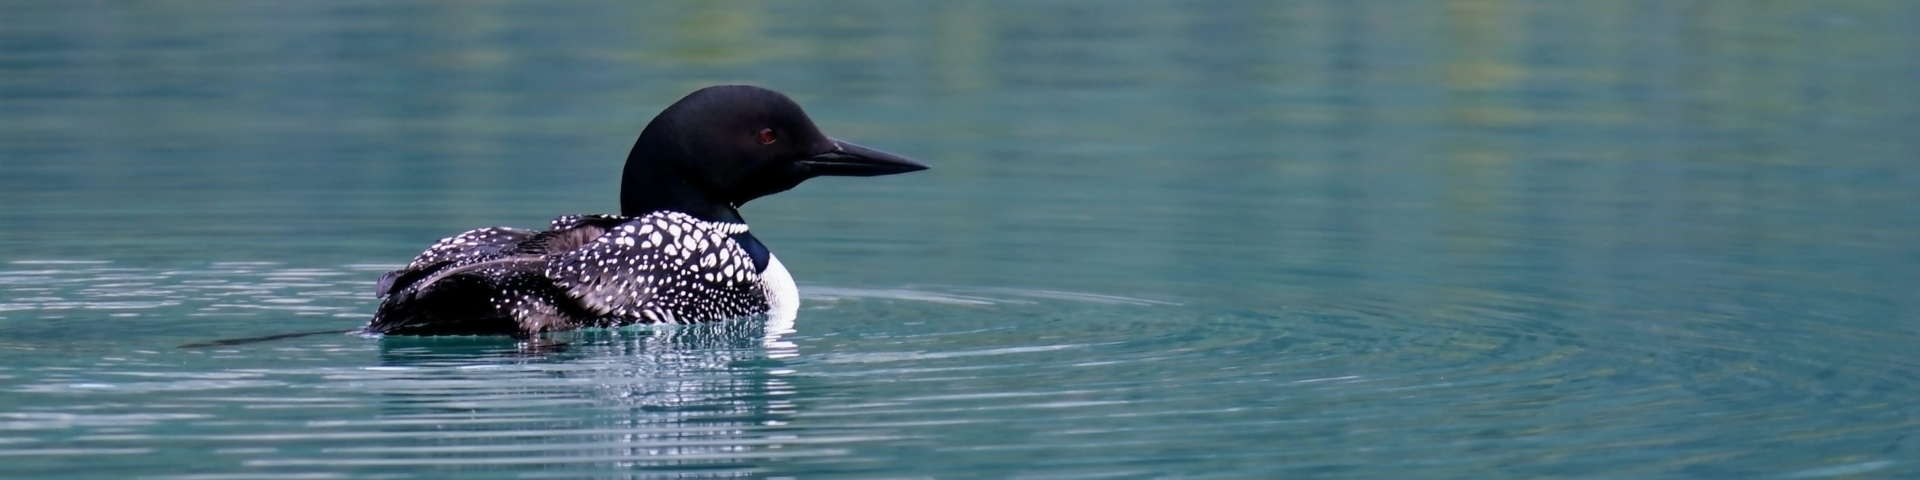 Loon On A Lake Home Page Hero